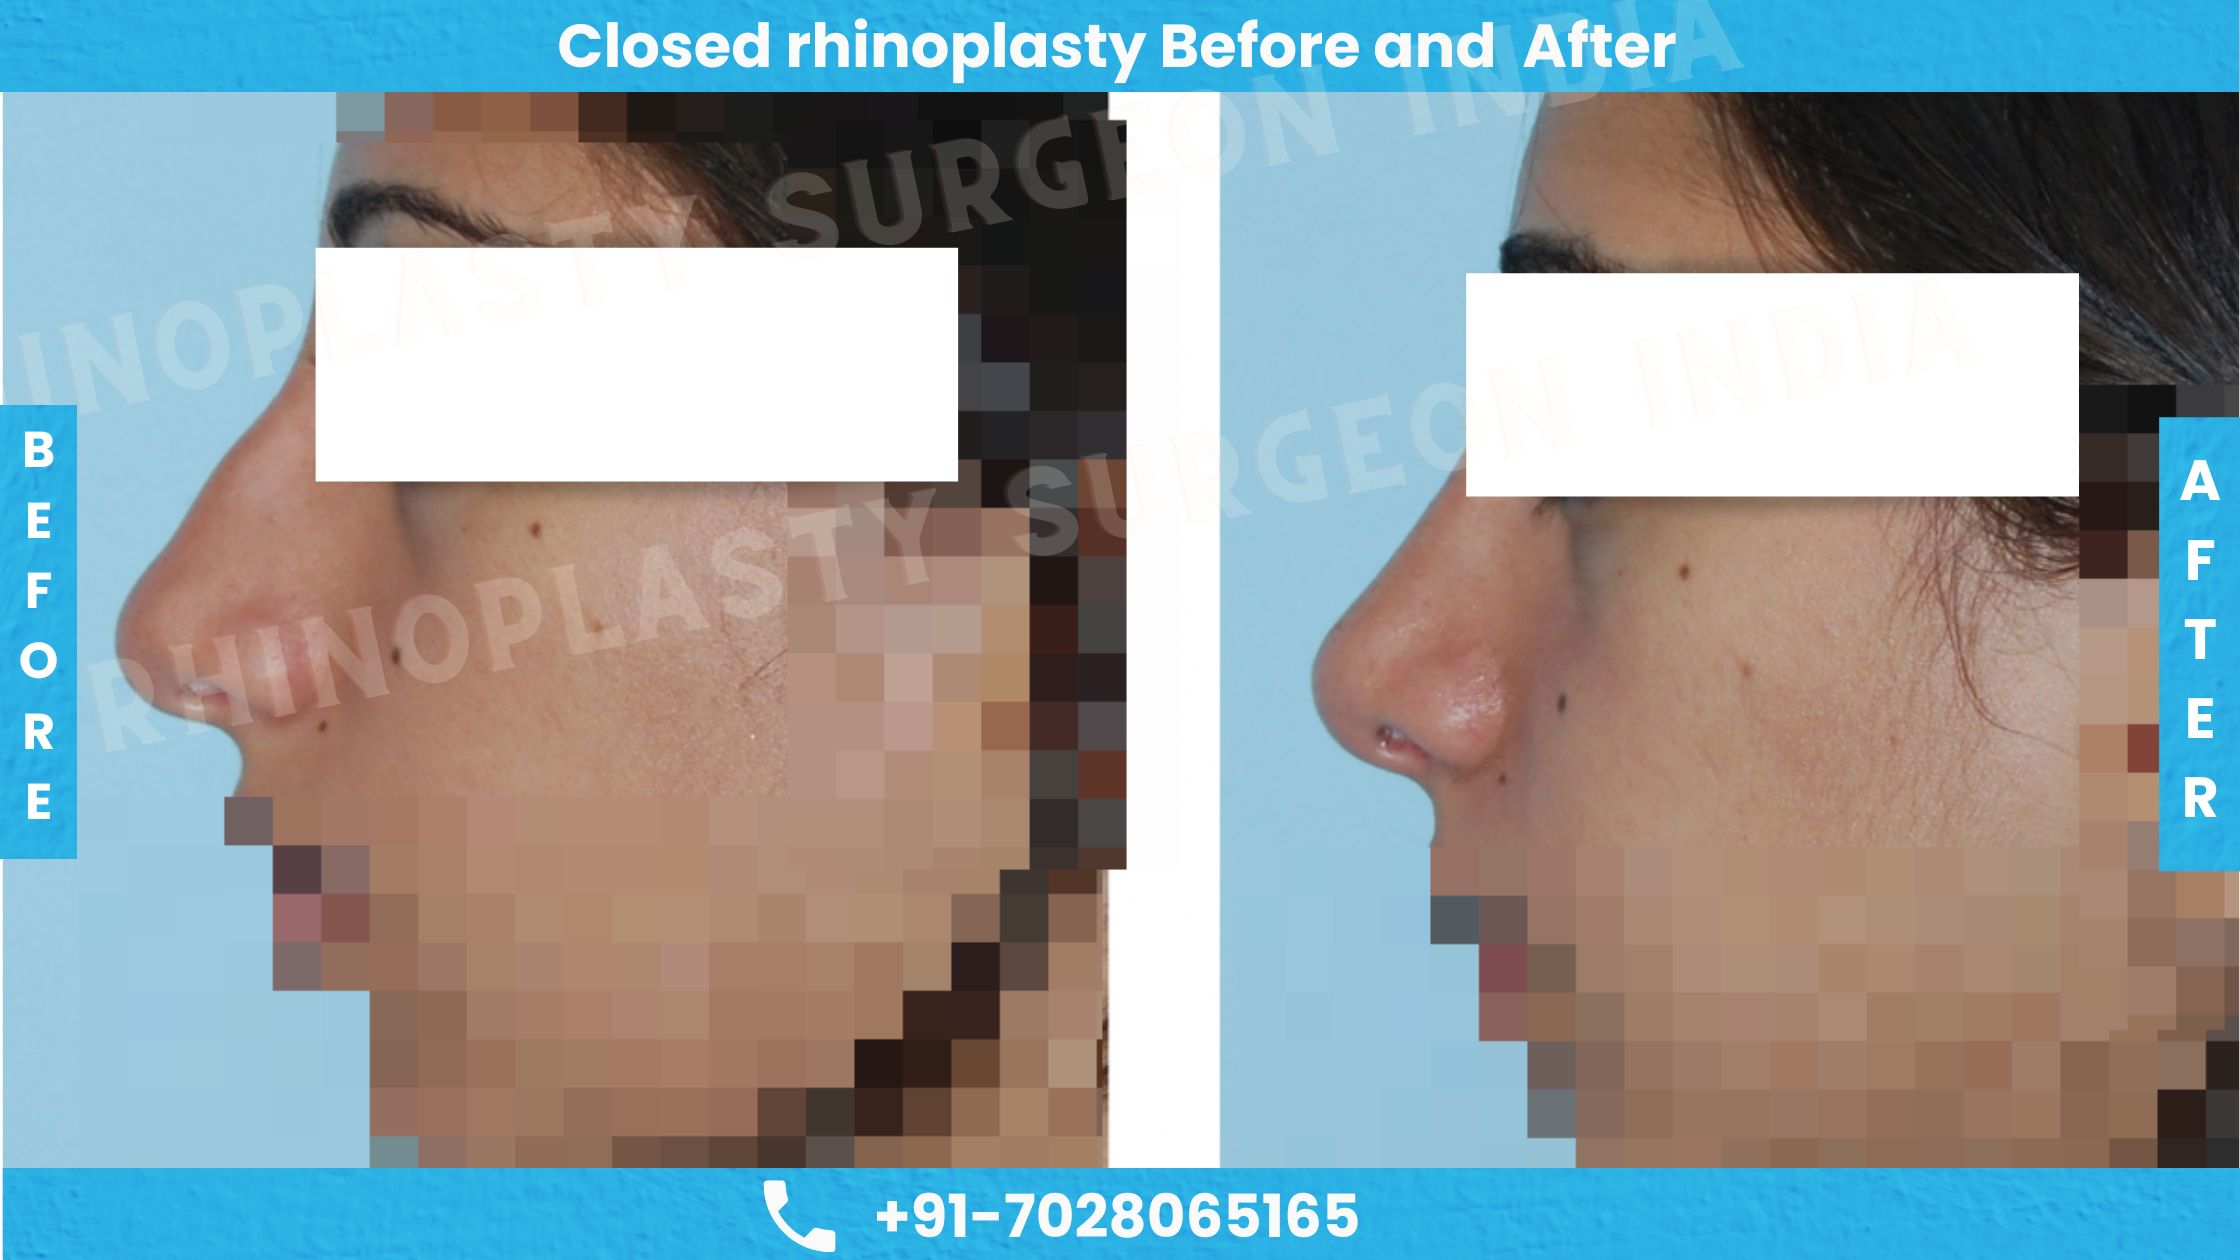 Before and After photos of Closed Rhinoplasty treatment 